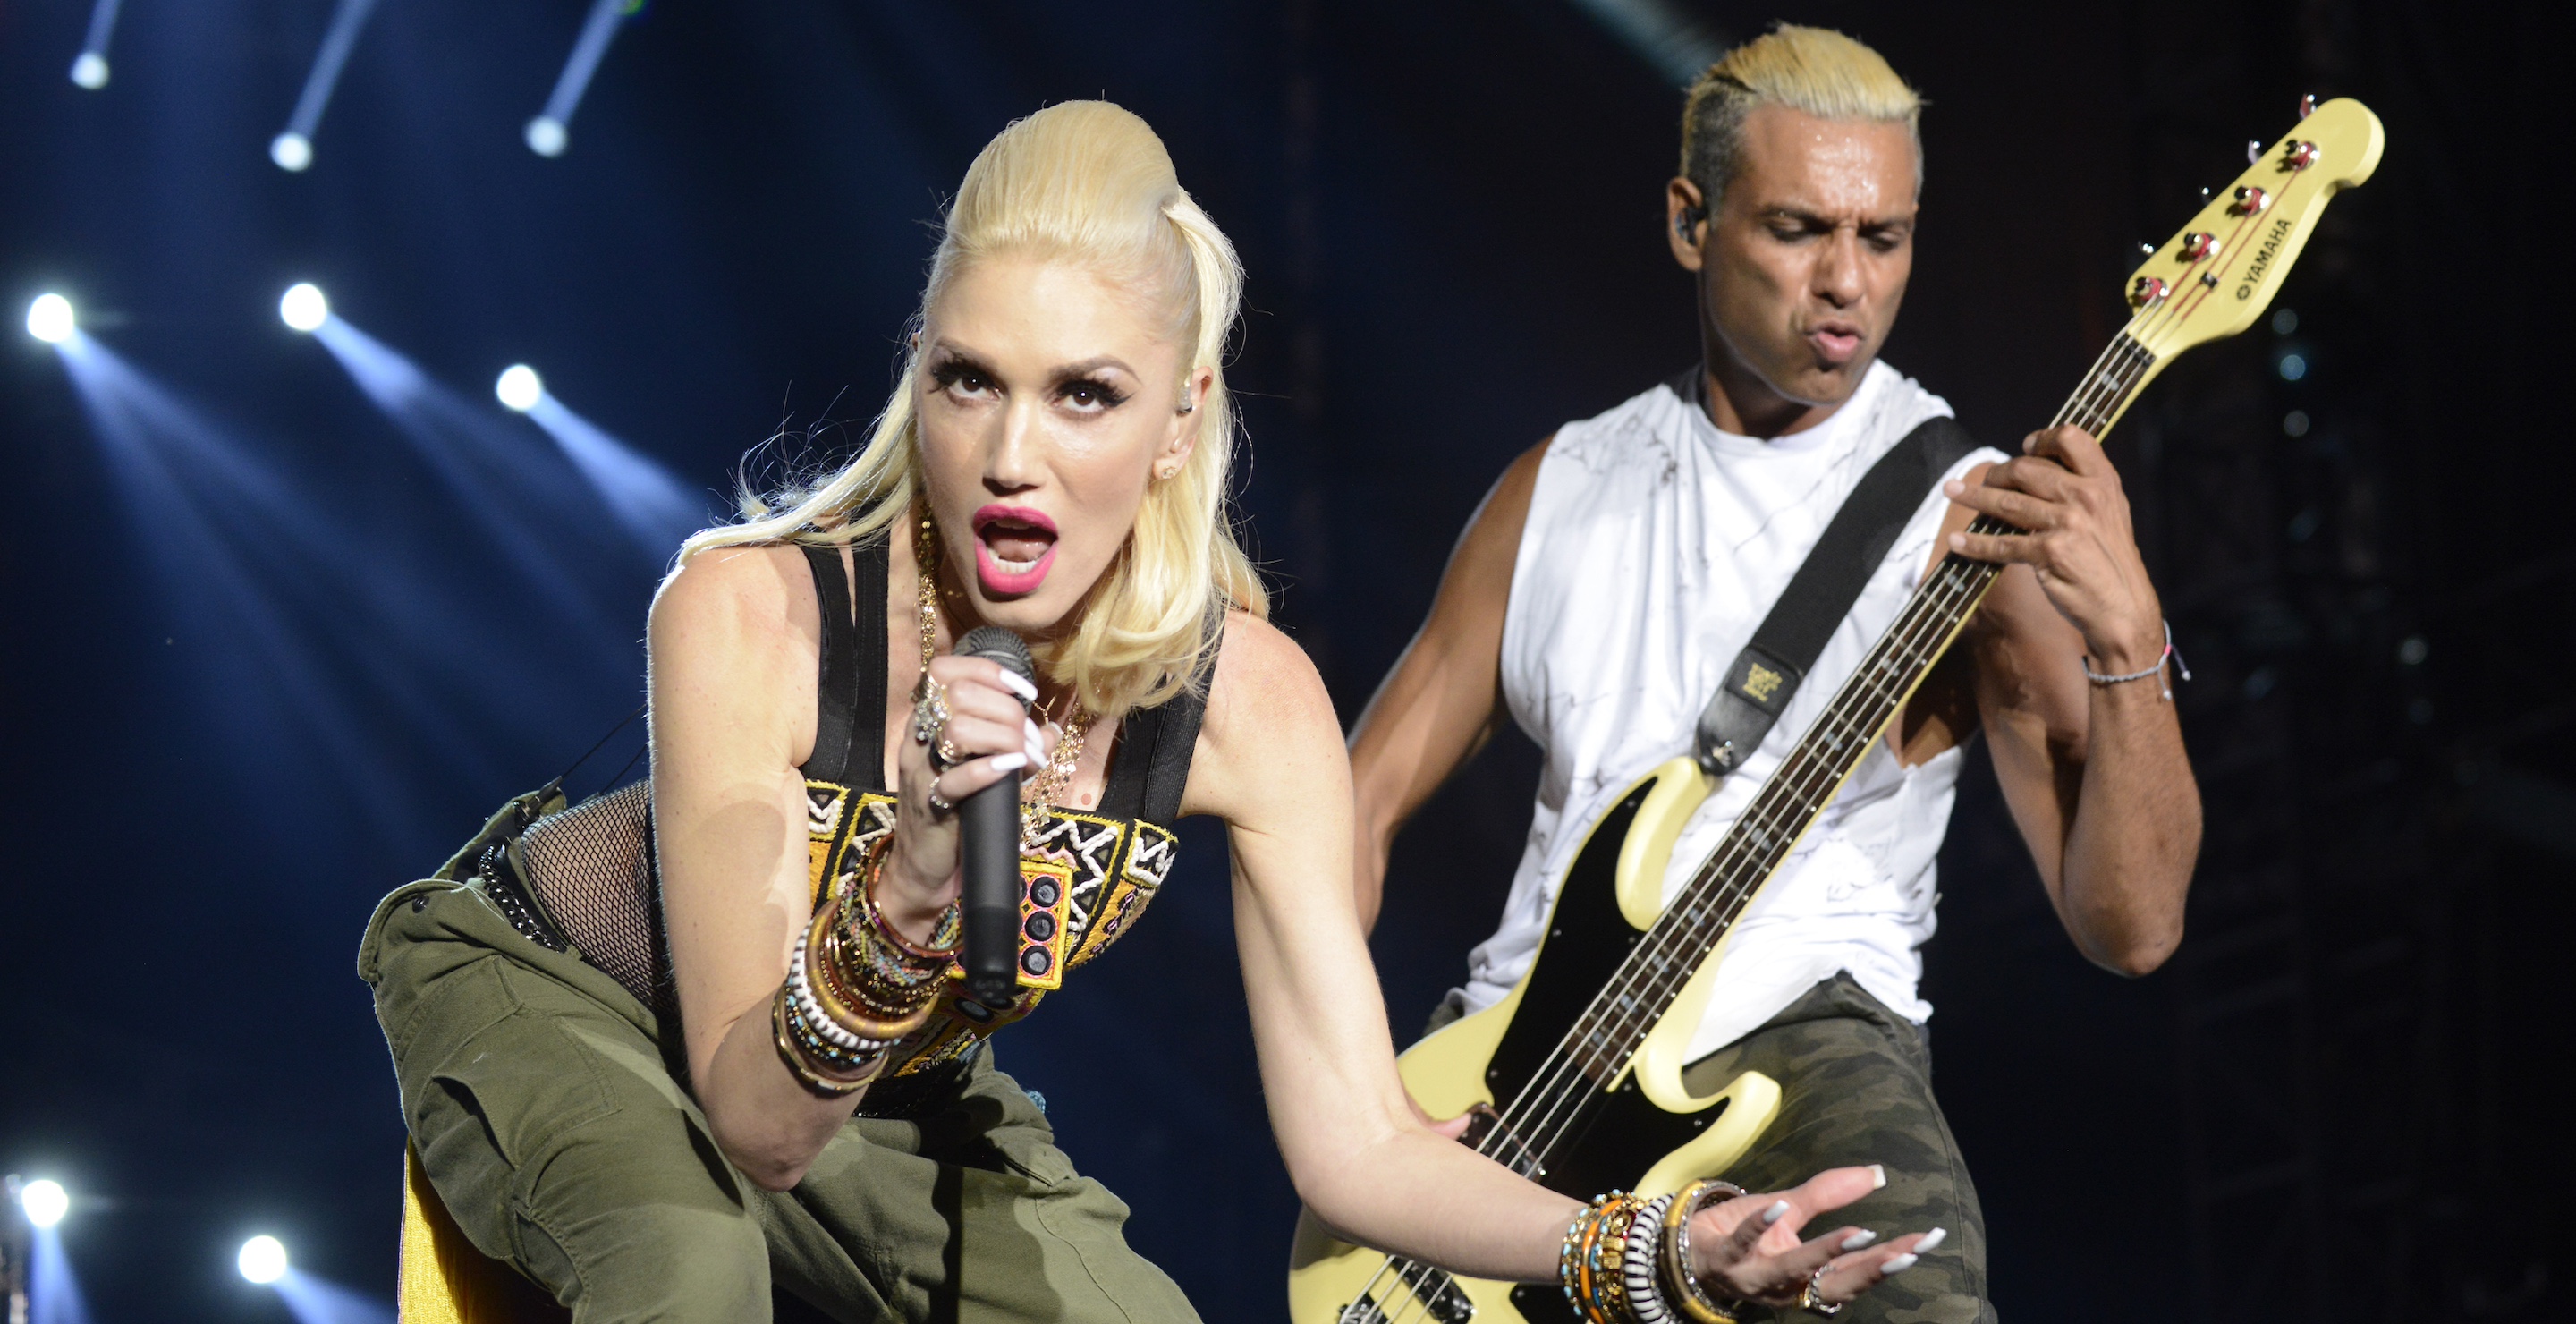 DEL MAR, CA - SEPTEMBER 18: Gwen Stefani (L) and Tony Kanal of No Doubt perform during KAABOO Festival 2015 at Del Mar Fairgrounds on September 18, 2015 in Del Mar, California.